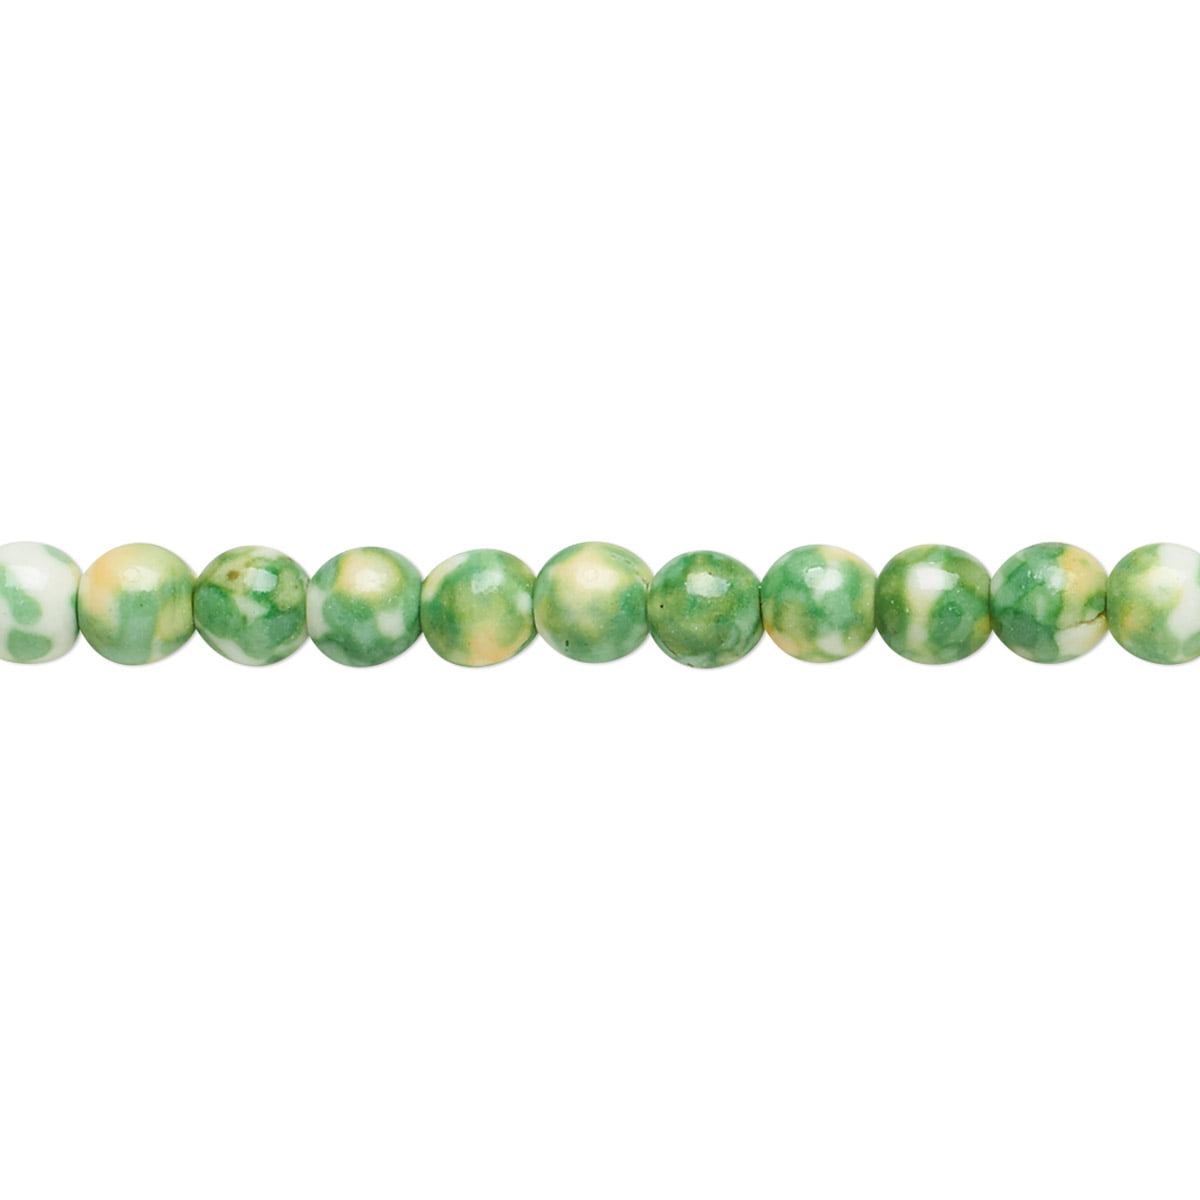 Green Striped Resin Beads 6-14mm Graduated Necklace Jewelry 